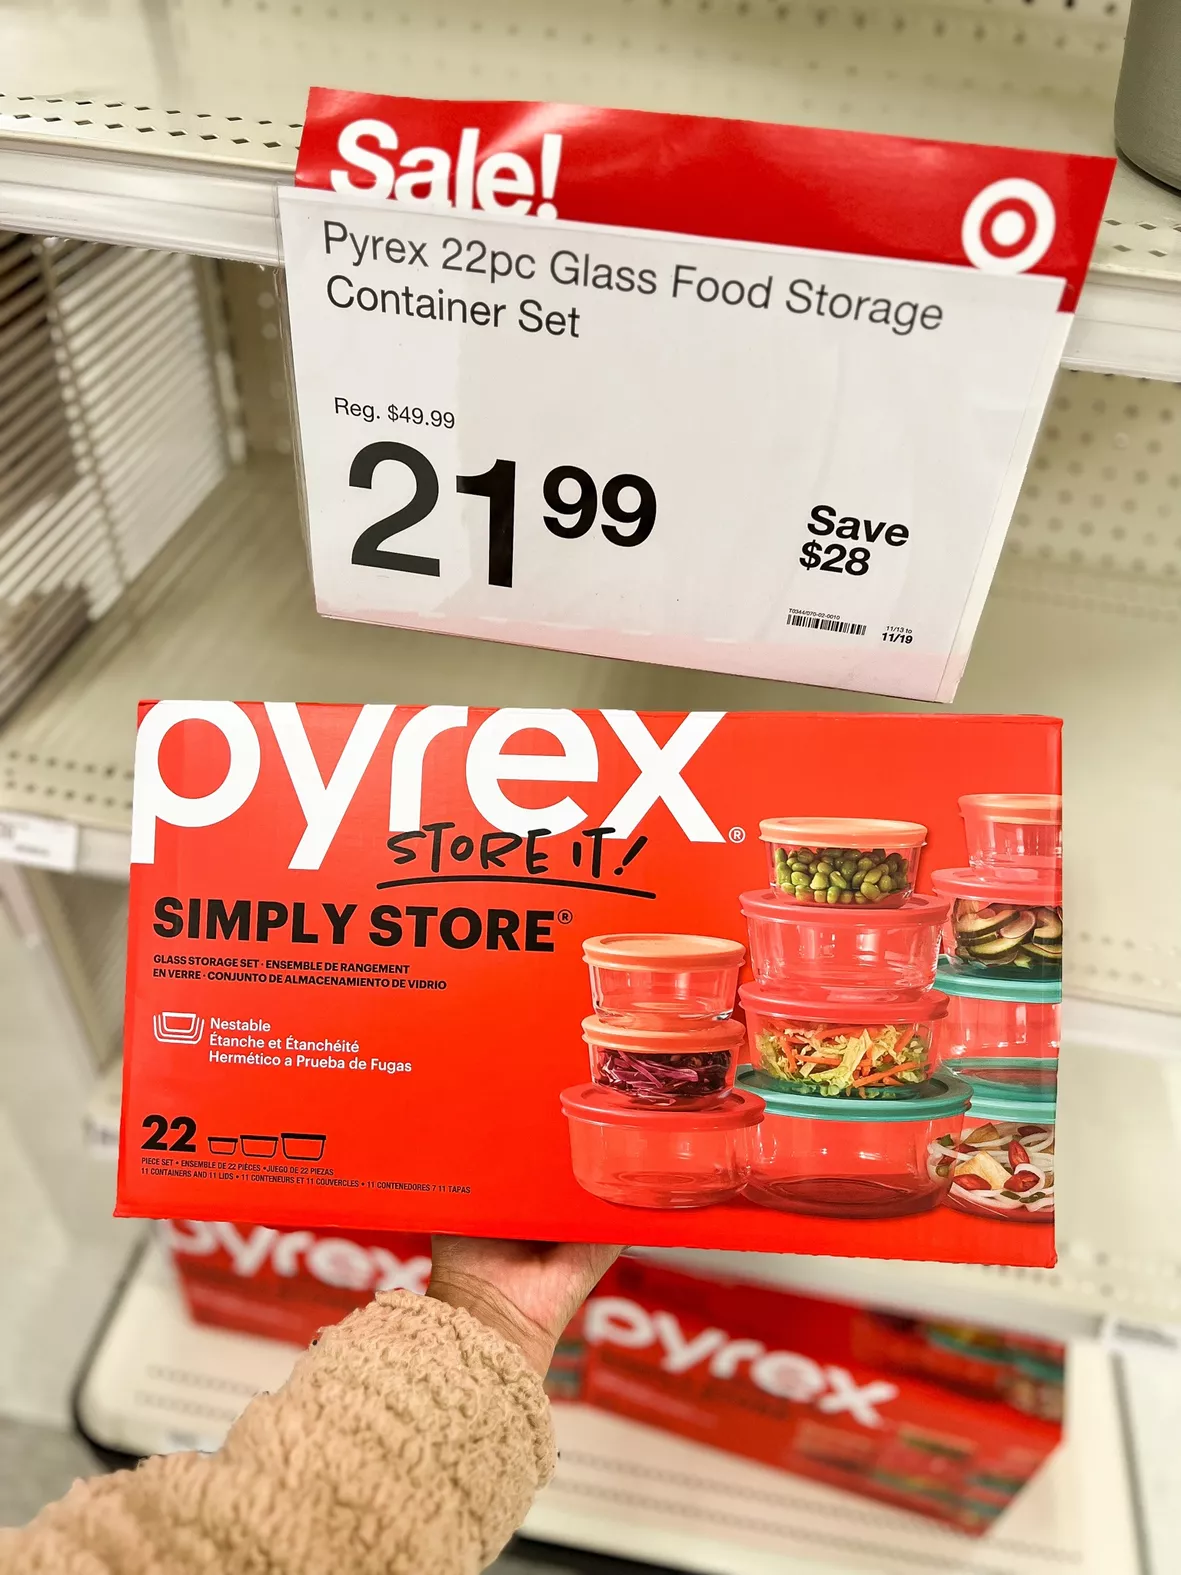 Pyrex 22-Piece Glass Food Storage Container Set for only $21.99 (Reg. $50!)  {Black Friday Deal}